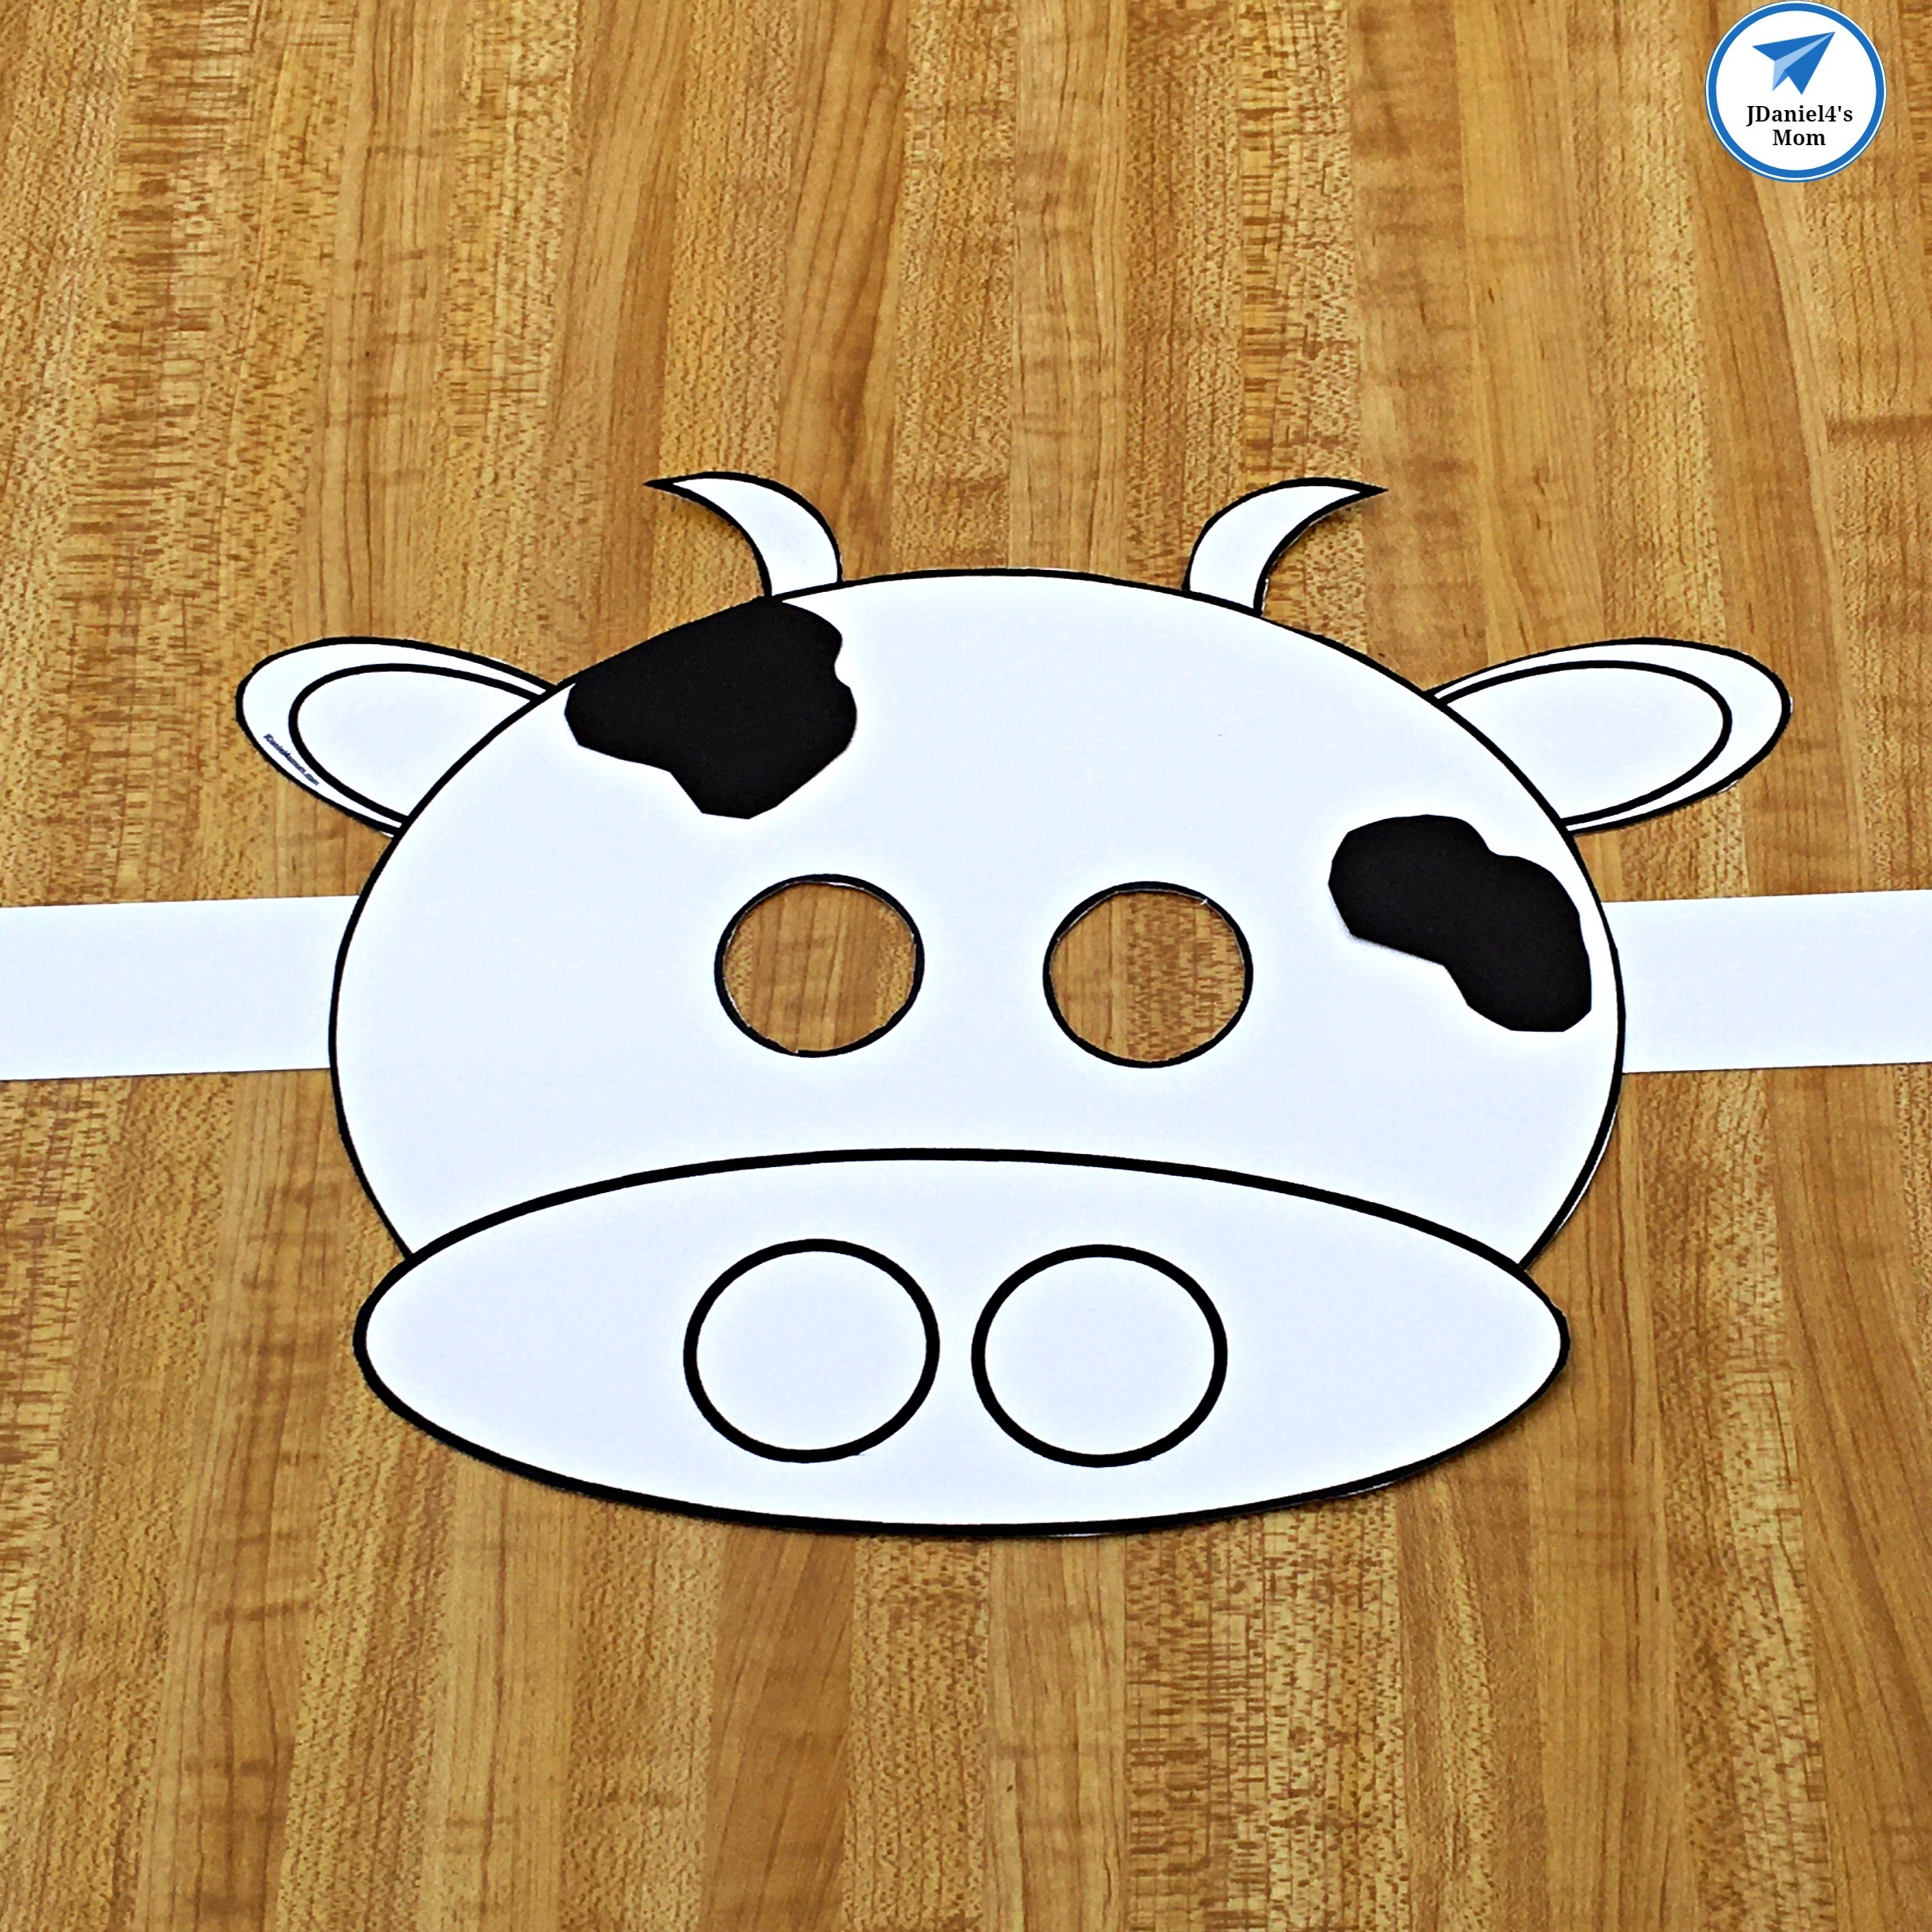 Paper Cow Mask Printable - All About Cow Photos